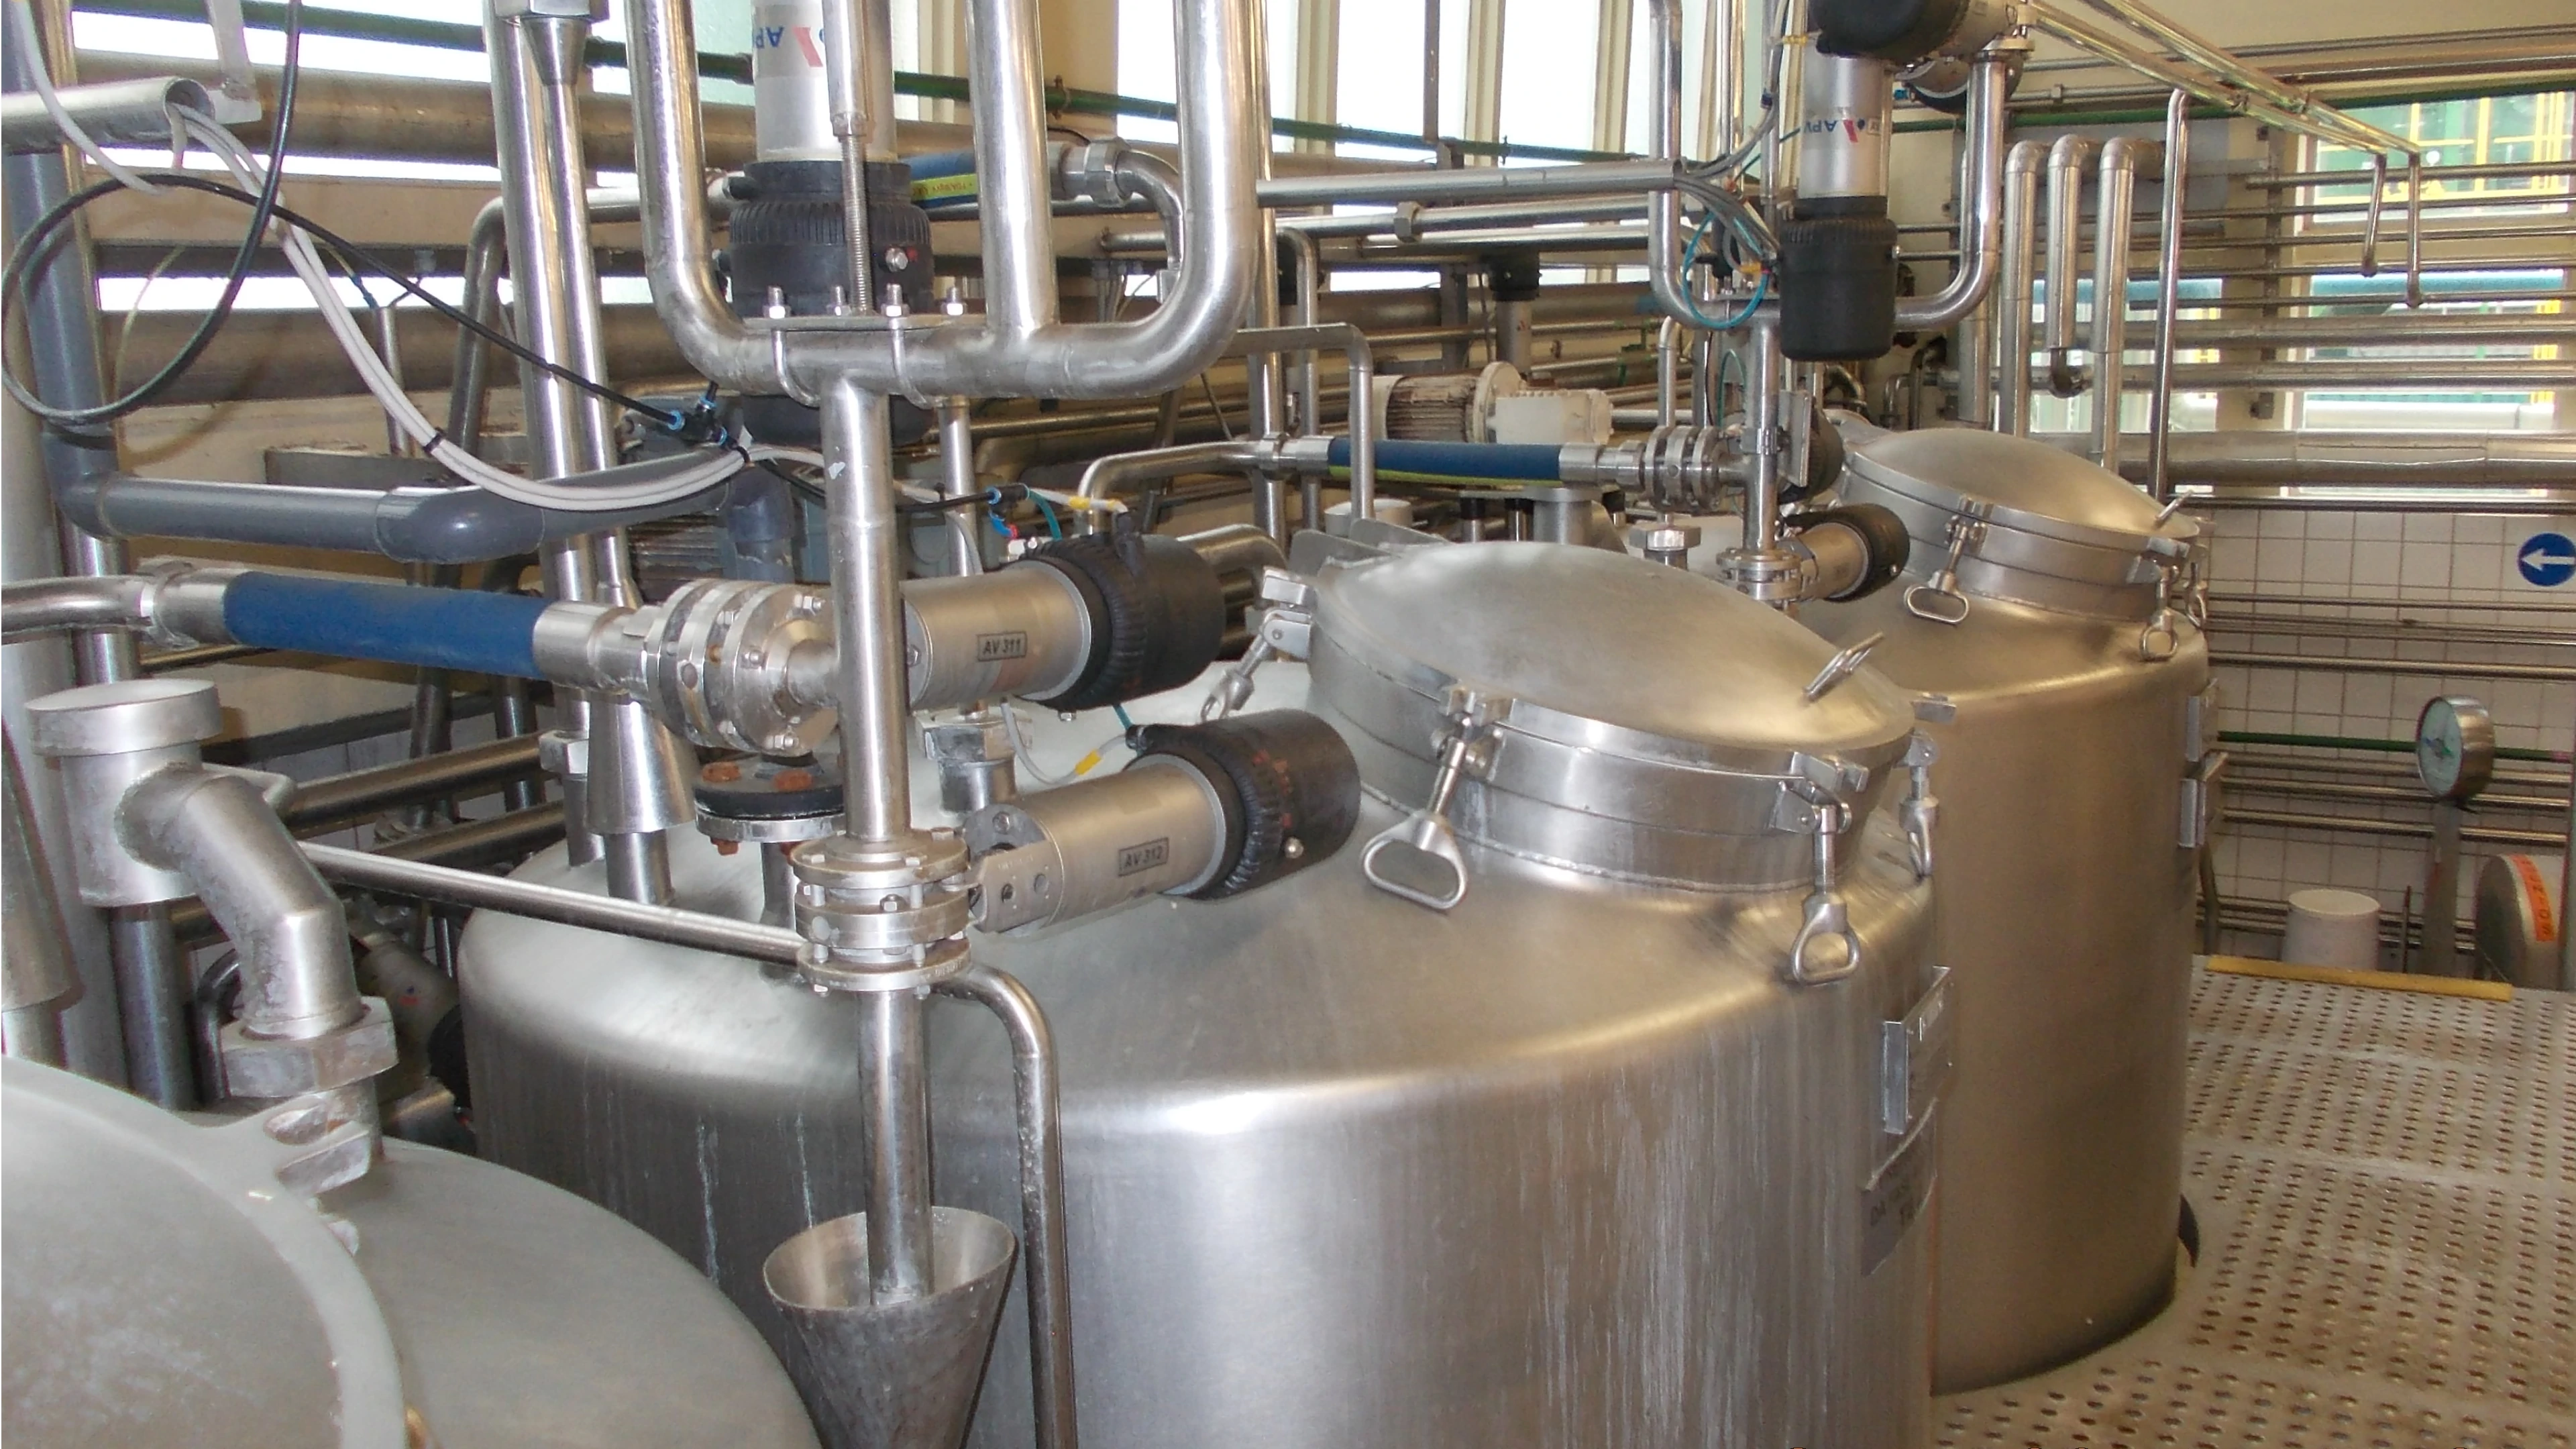 BTL Mixers in stainless stell - Food Industry